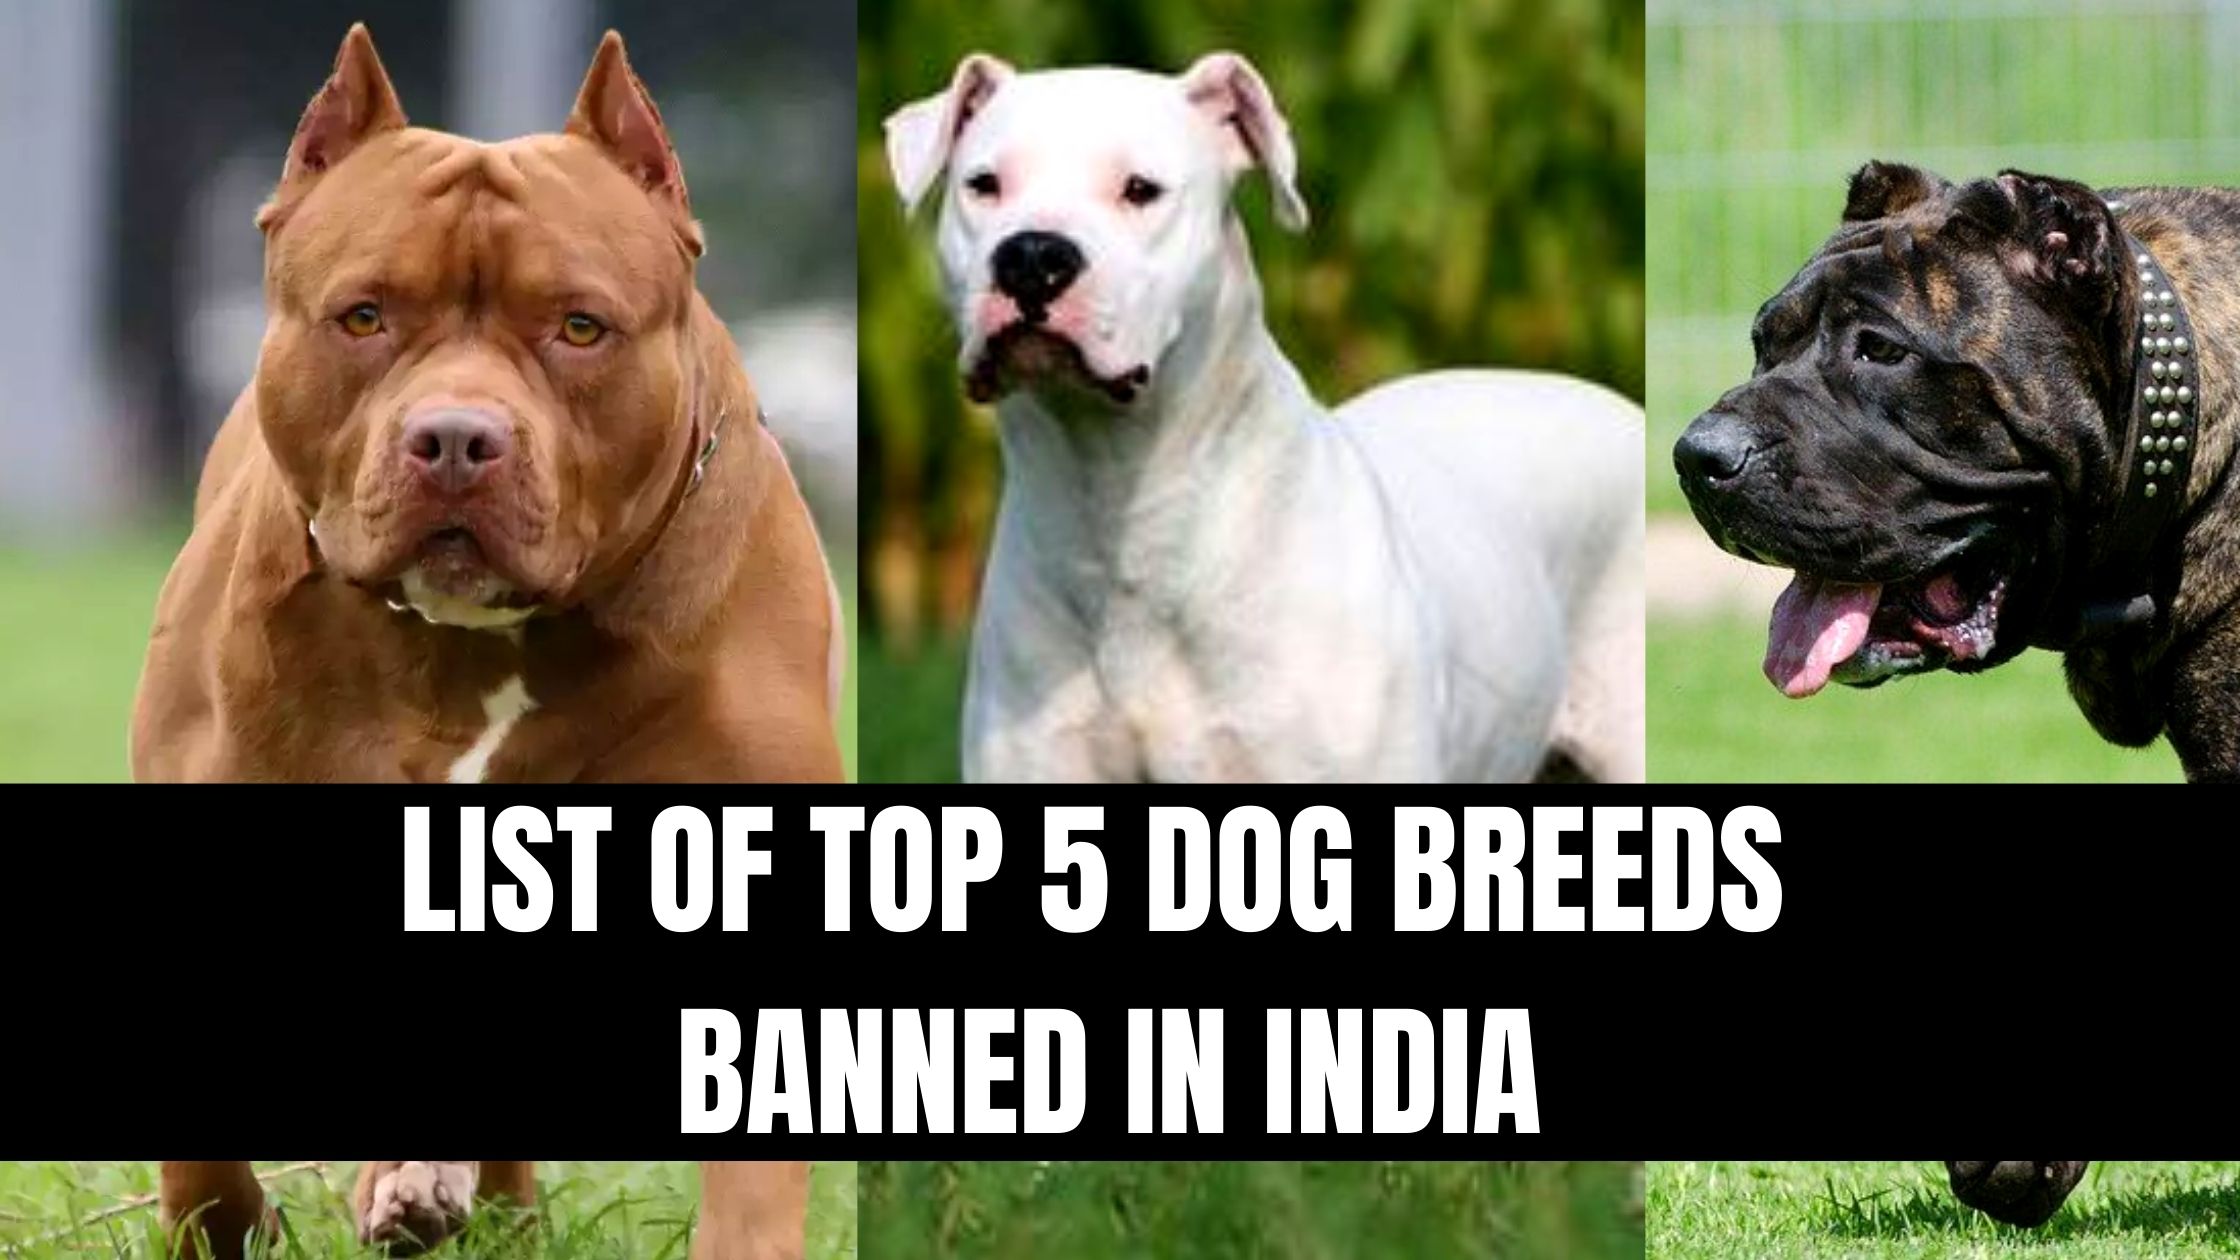 List of top 5 Dog Breeds banned in India